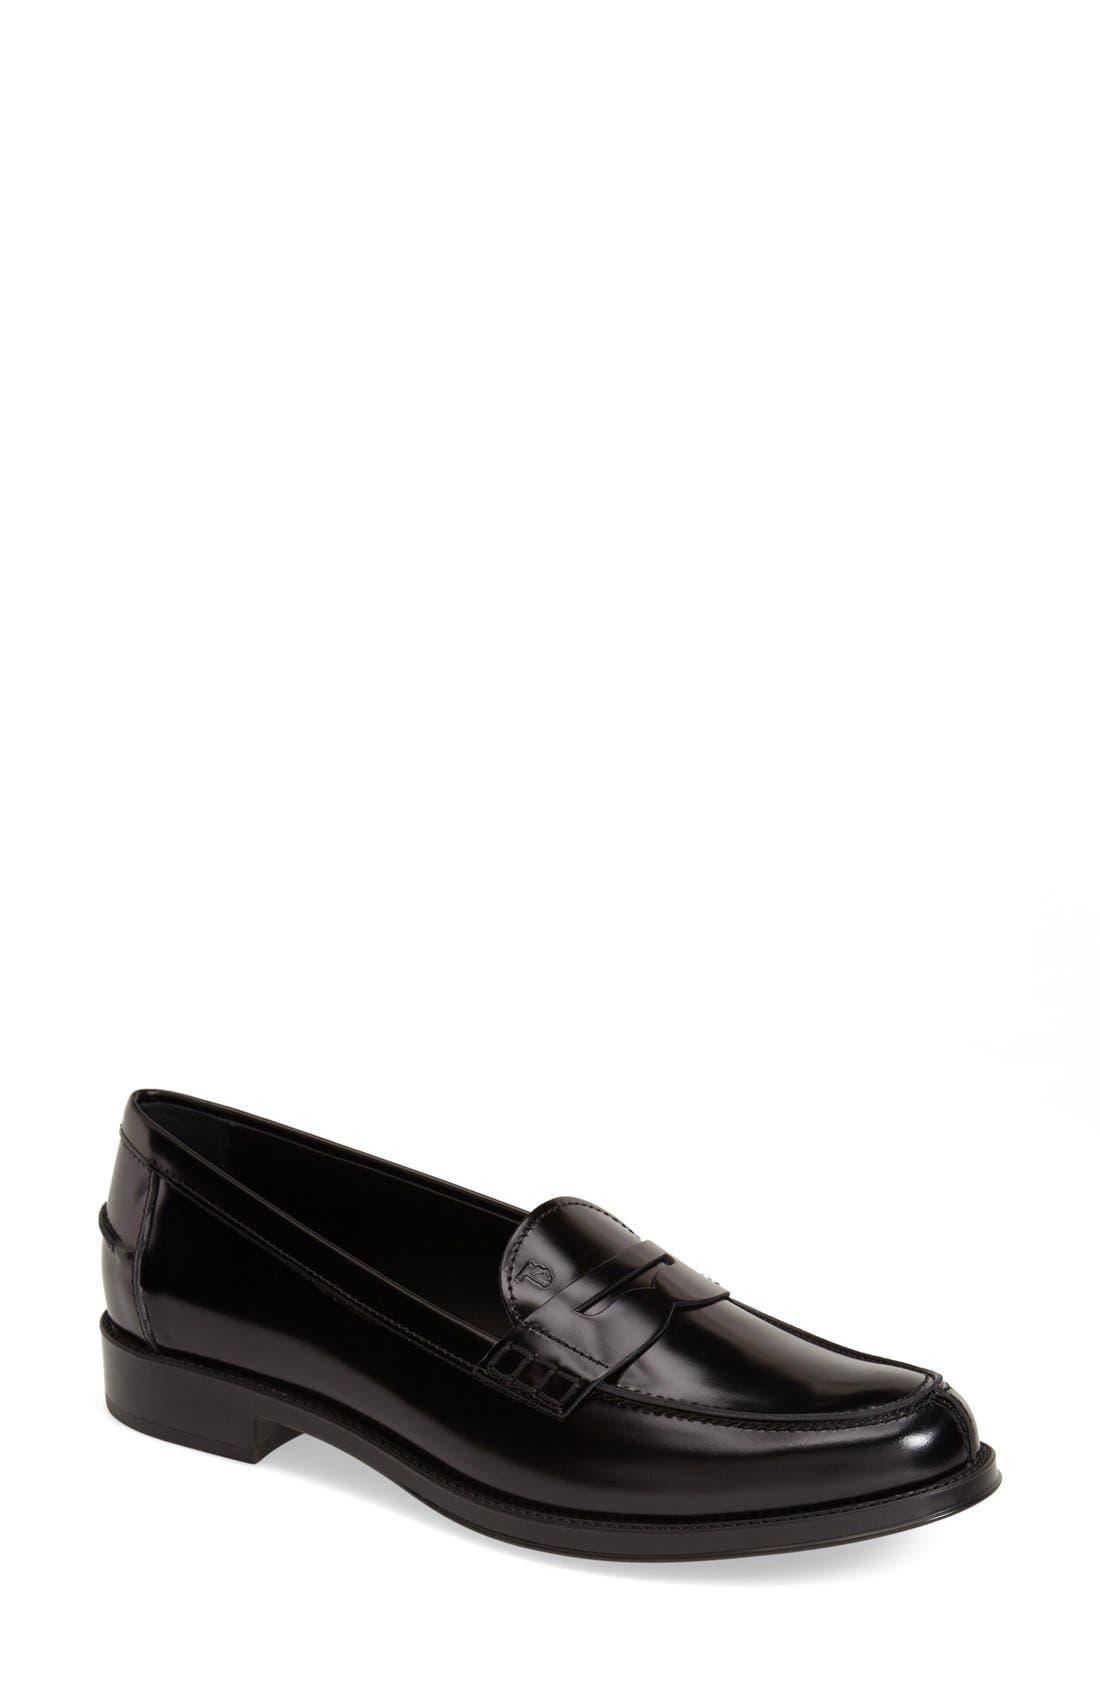 Women's Tod's Loafers \u0026 Oxfords | Nordstrom